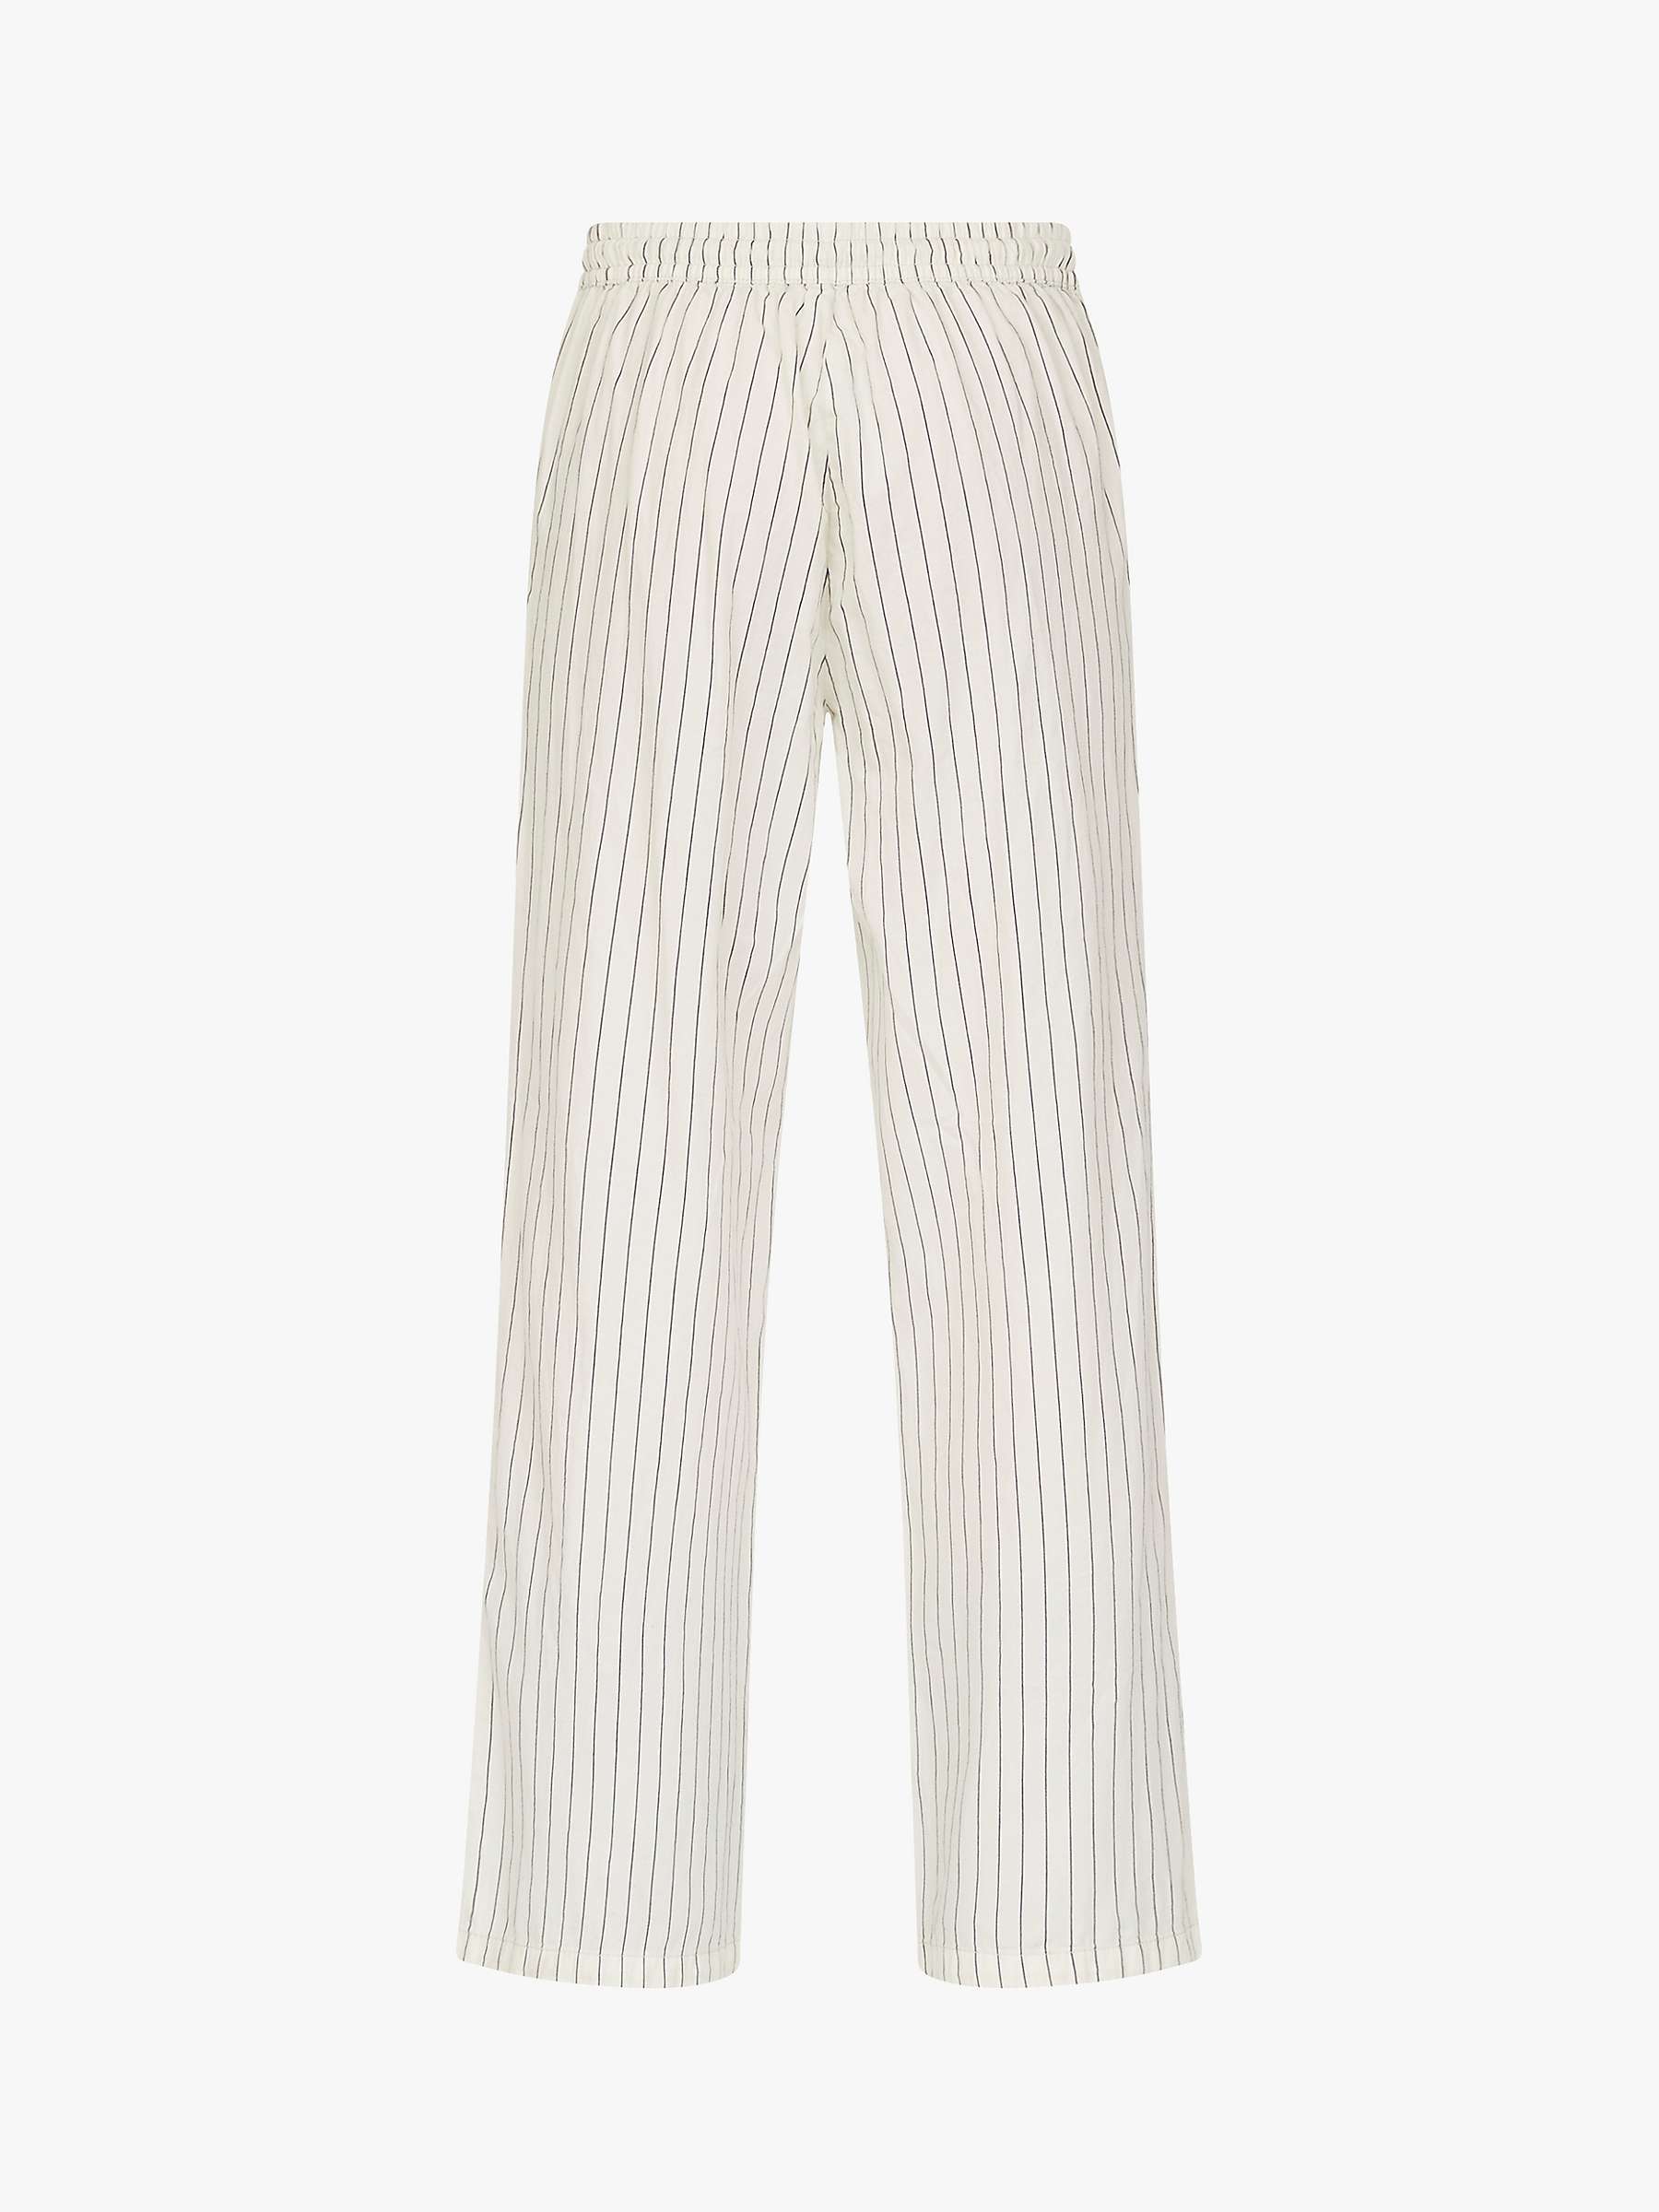 Buy Sisters Point Ella Loose Fitted Striped Trousers, Cream/Navy Online at johnlewis.com